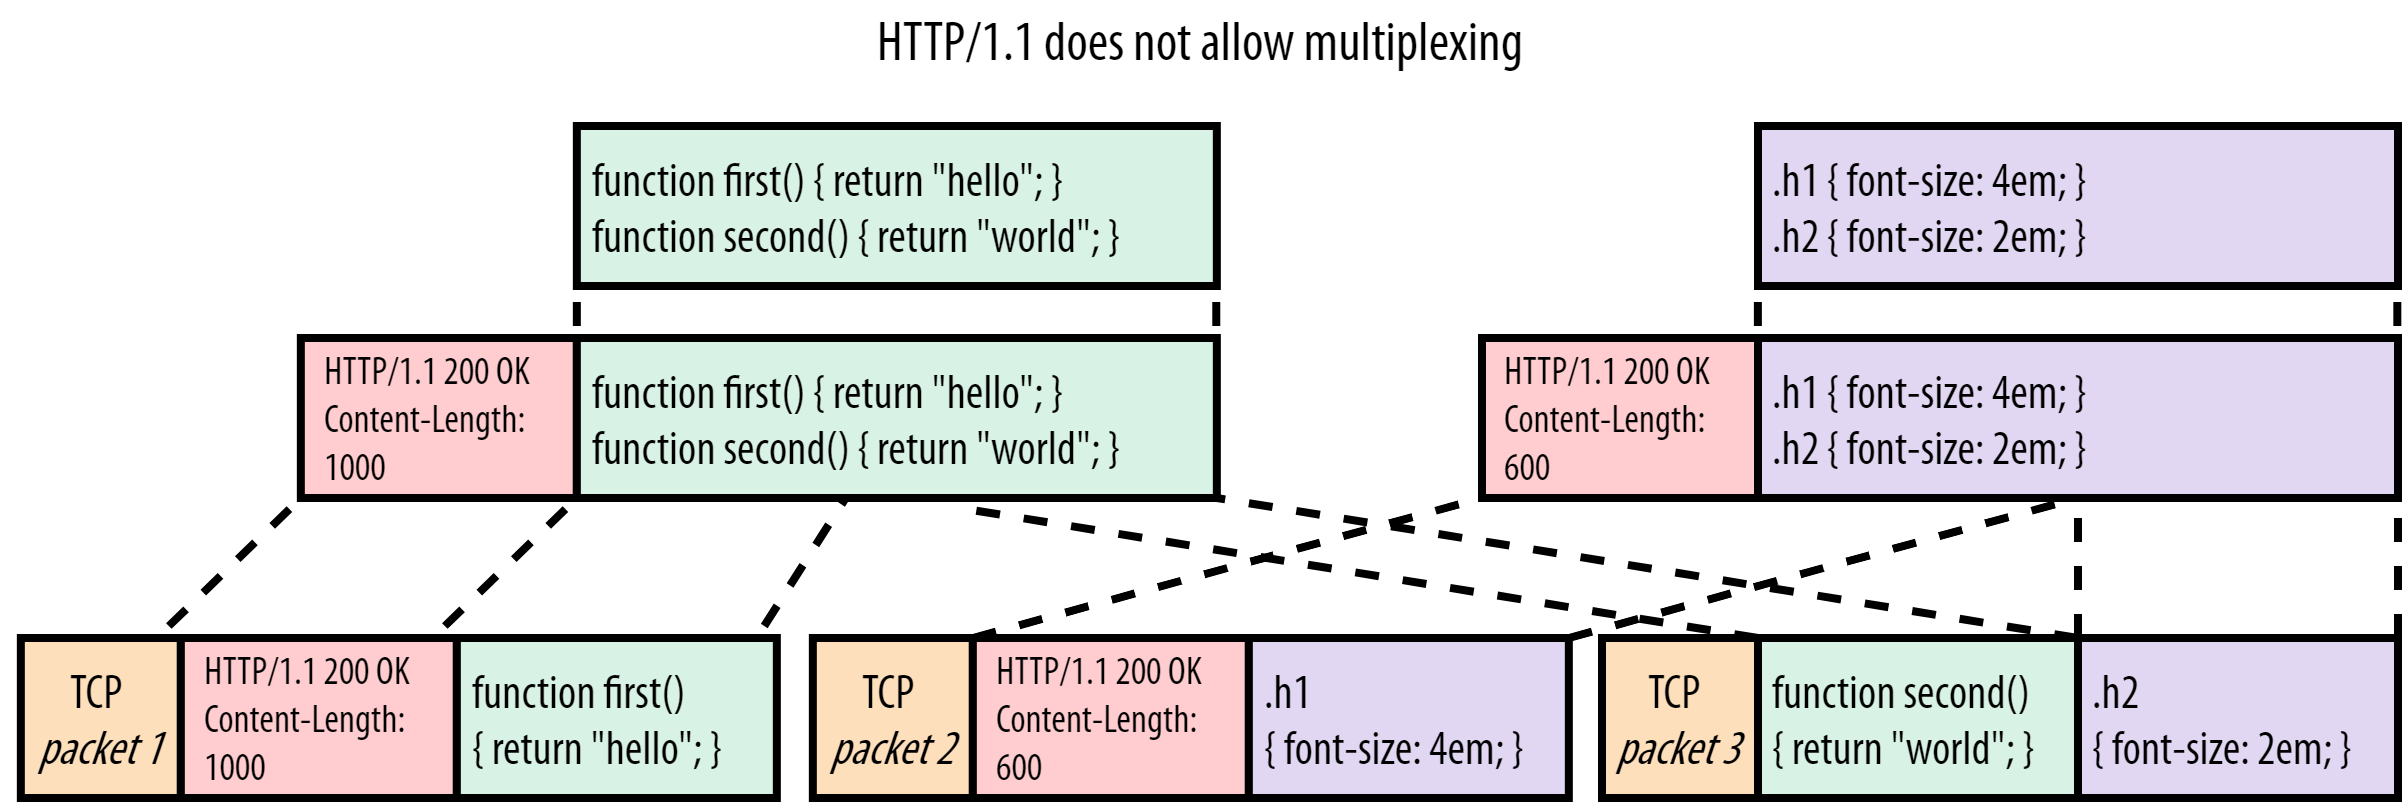 server HTTP/1.1 multiplexing for script.js and style.css